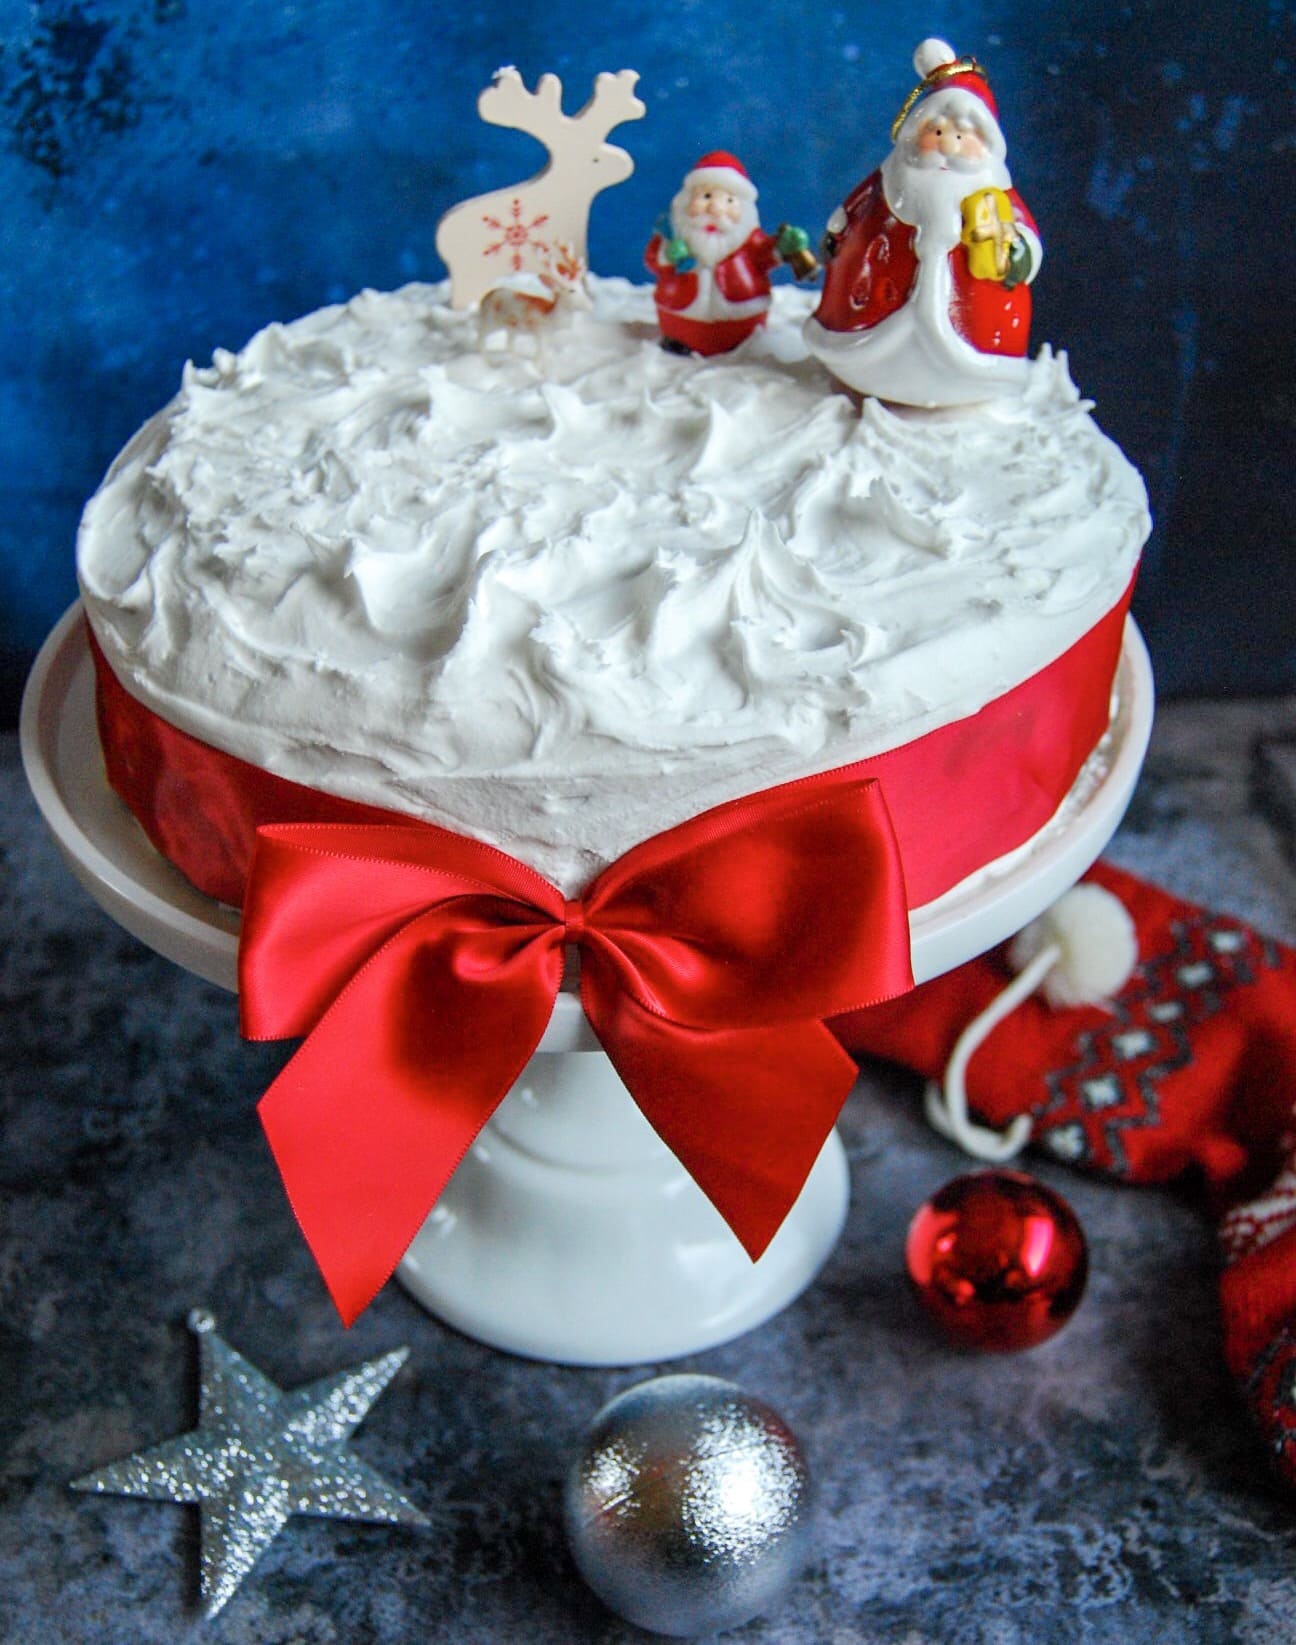 A Christmas cake decorated with white royal icing on a white cake stand. The cake has a prety red bow tied around it and it topped with Santa and Reindeer figures